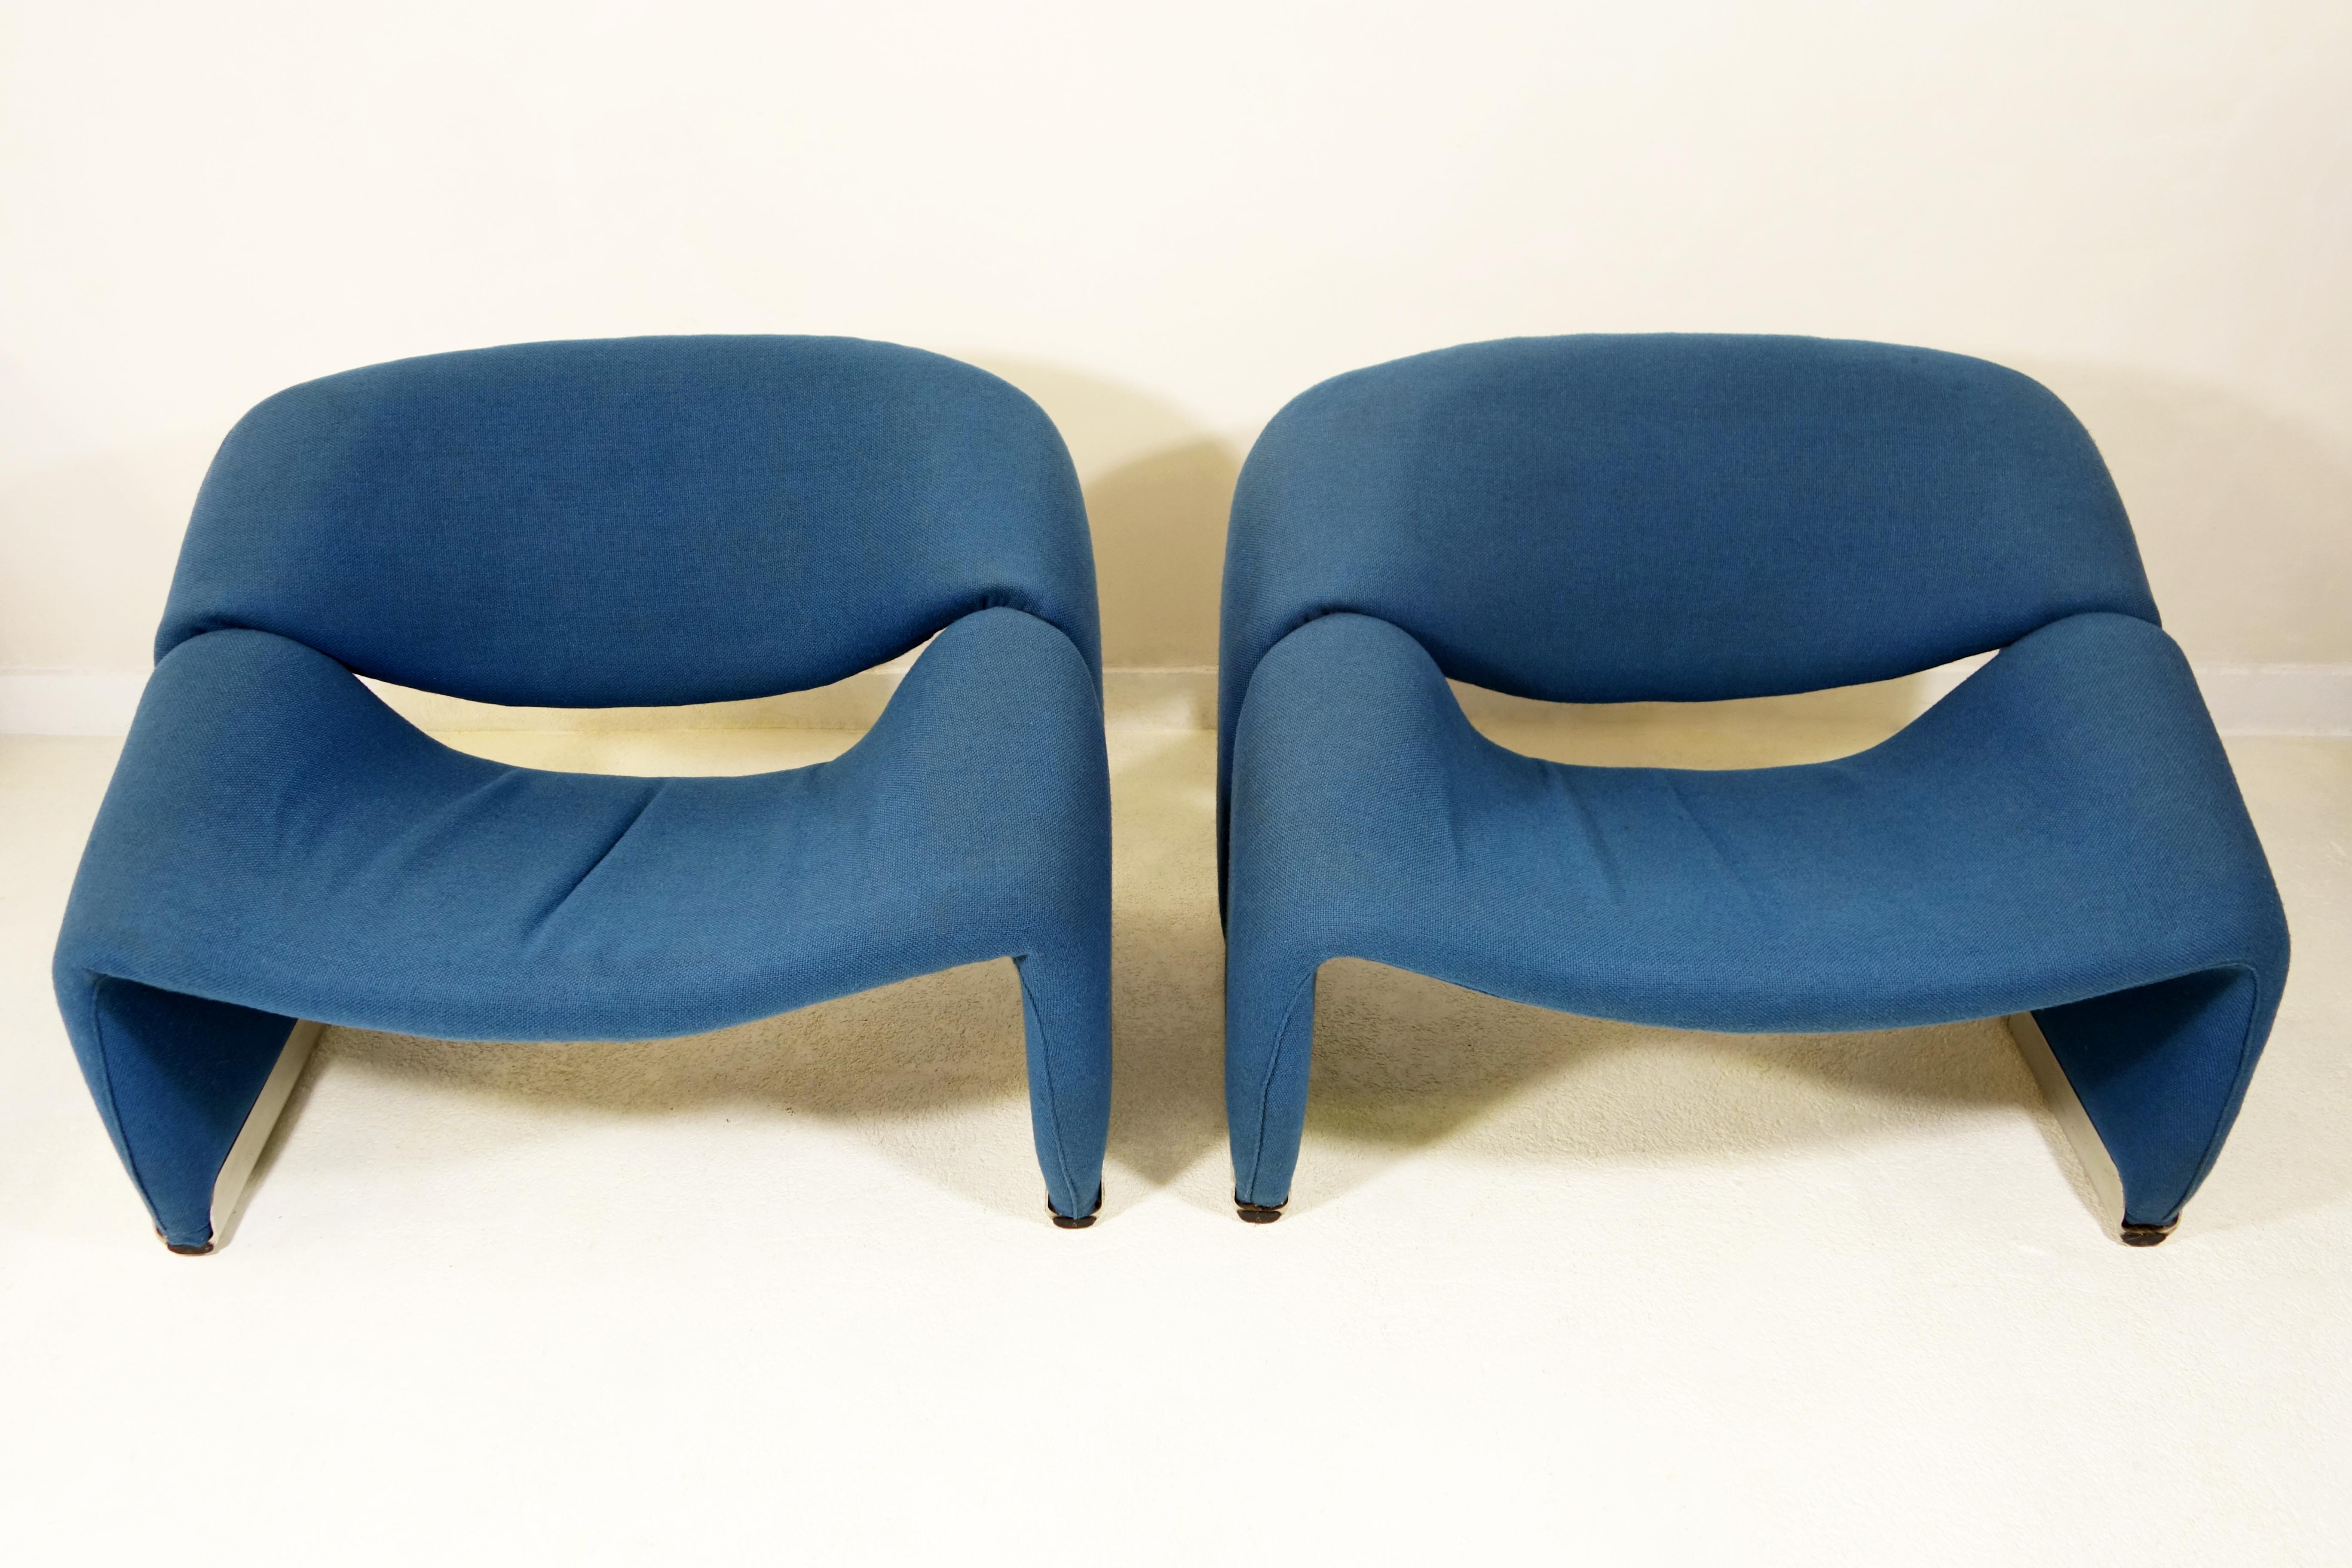 20th Century Pair of Blue Midcentury Groovy Chairs F598 by Pierre Paulin for Artifort